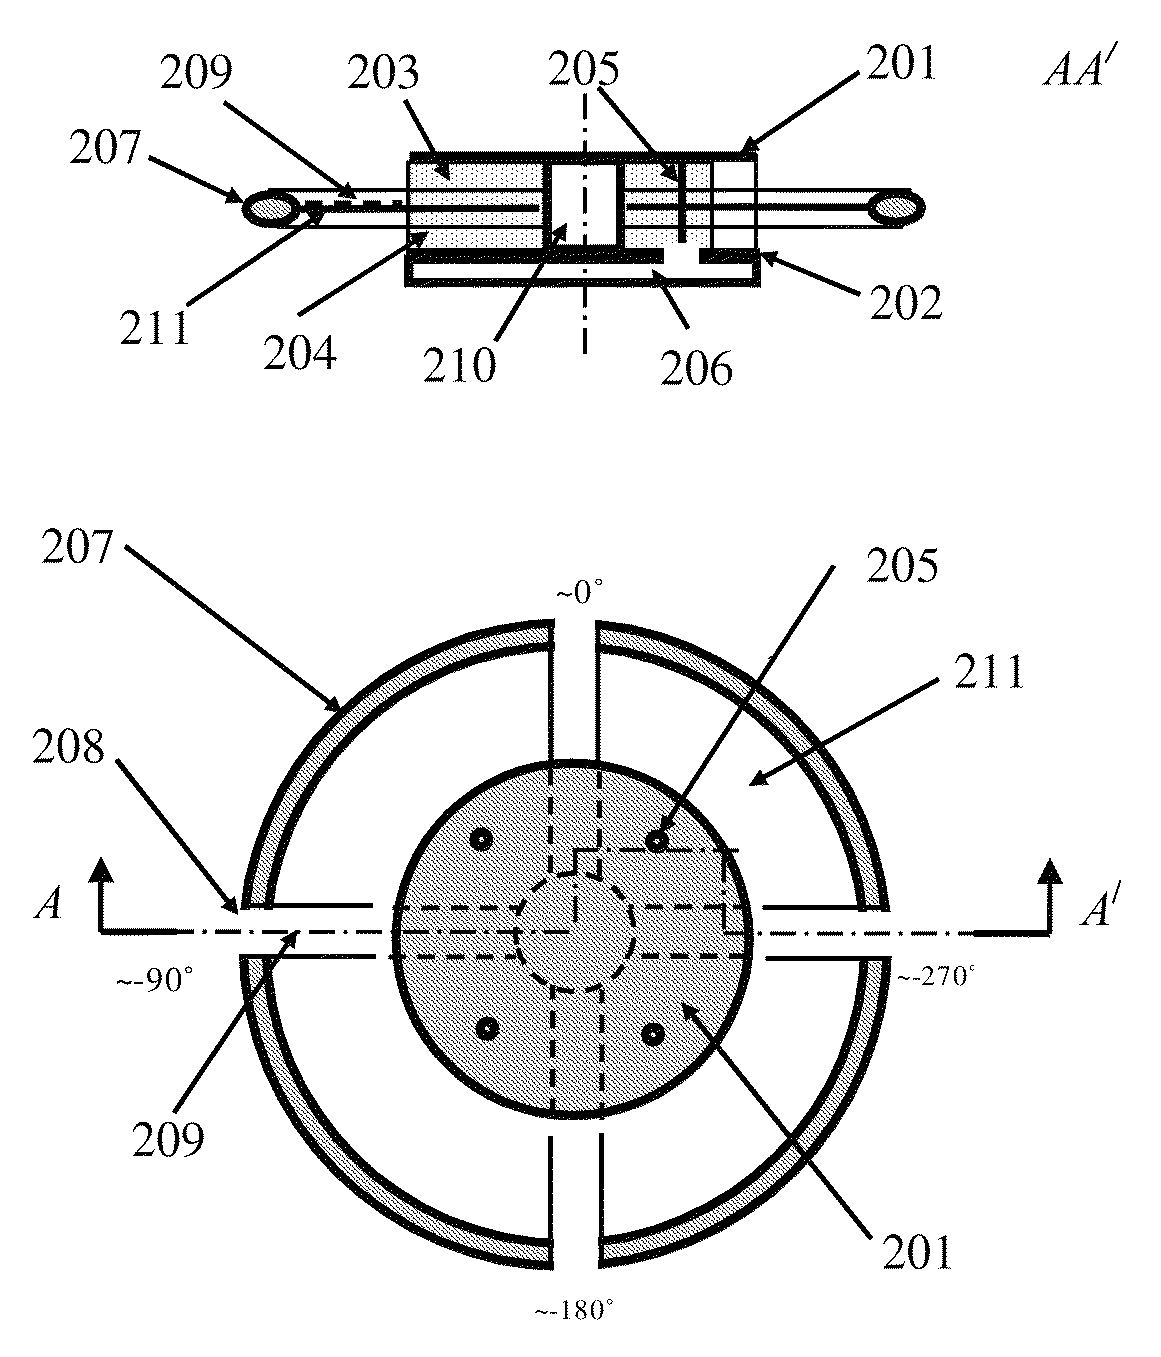 Compact circular polarization antenna system with reduced cross-polarization component